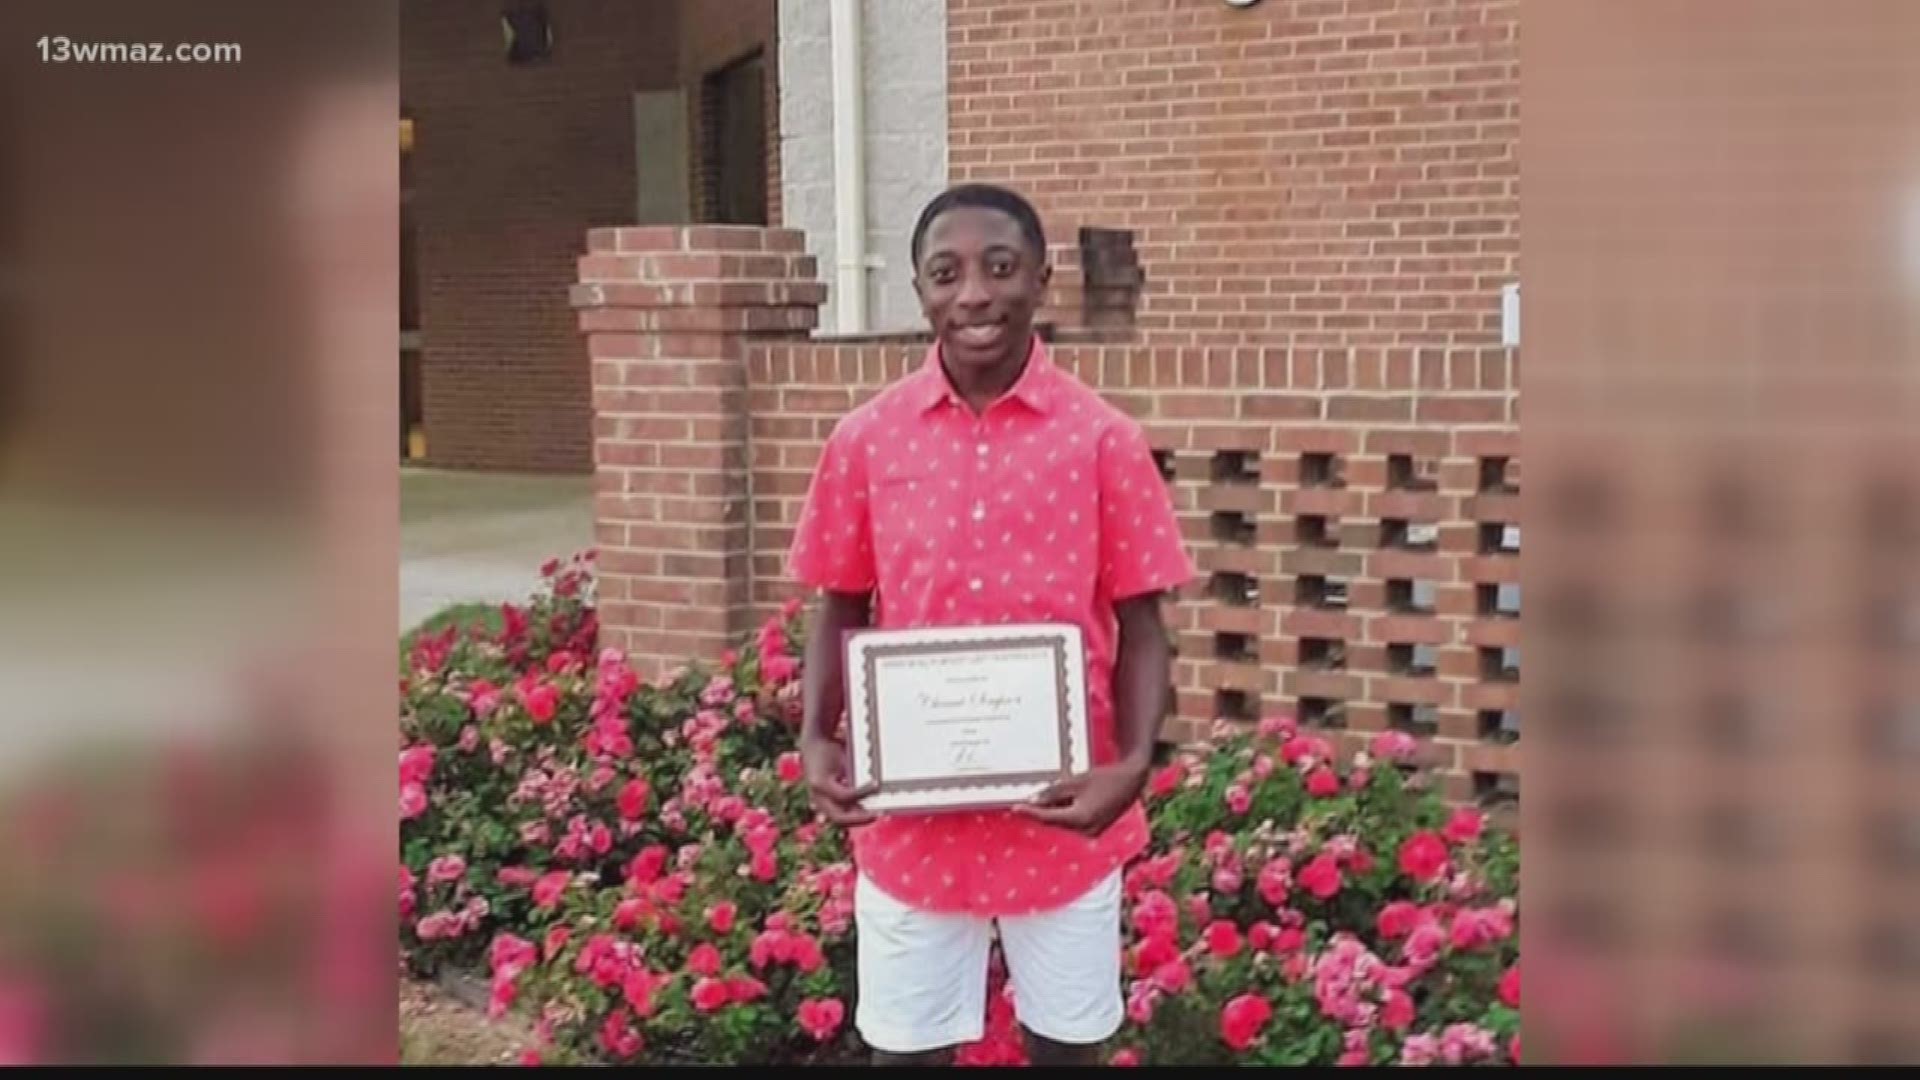 Chance Simpson completed his credits at Macon County High School. He's working on an associates degree through dual enrollment at South Georgia Technical College